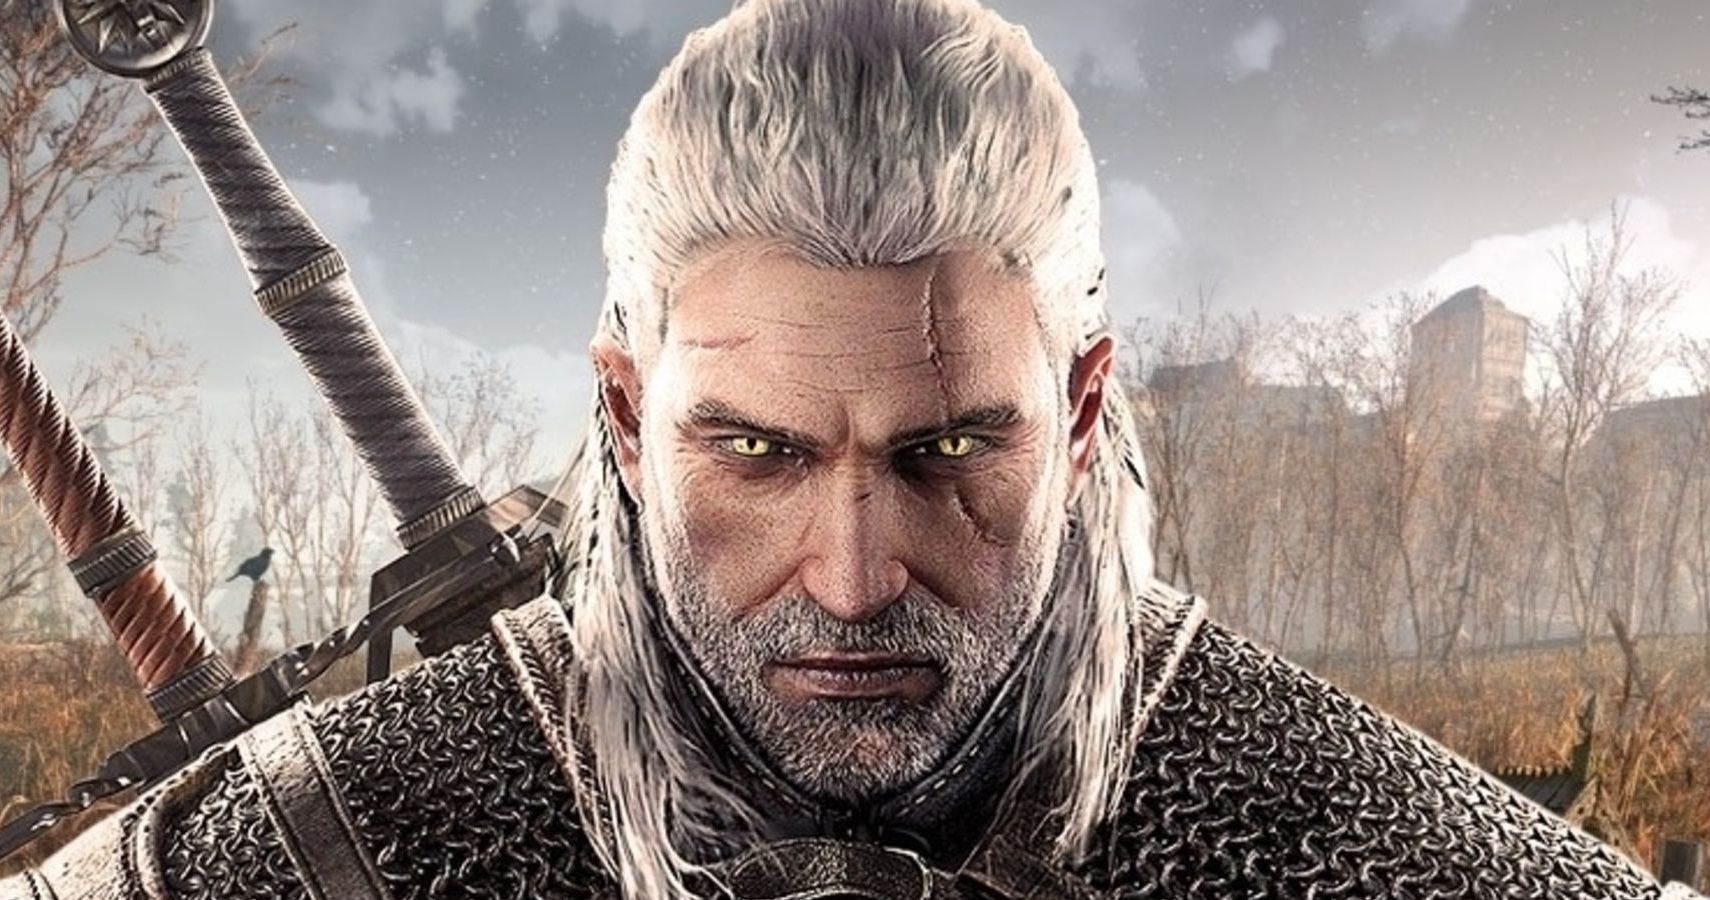 geralt staring straight at the camera, head and shoulders shot.